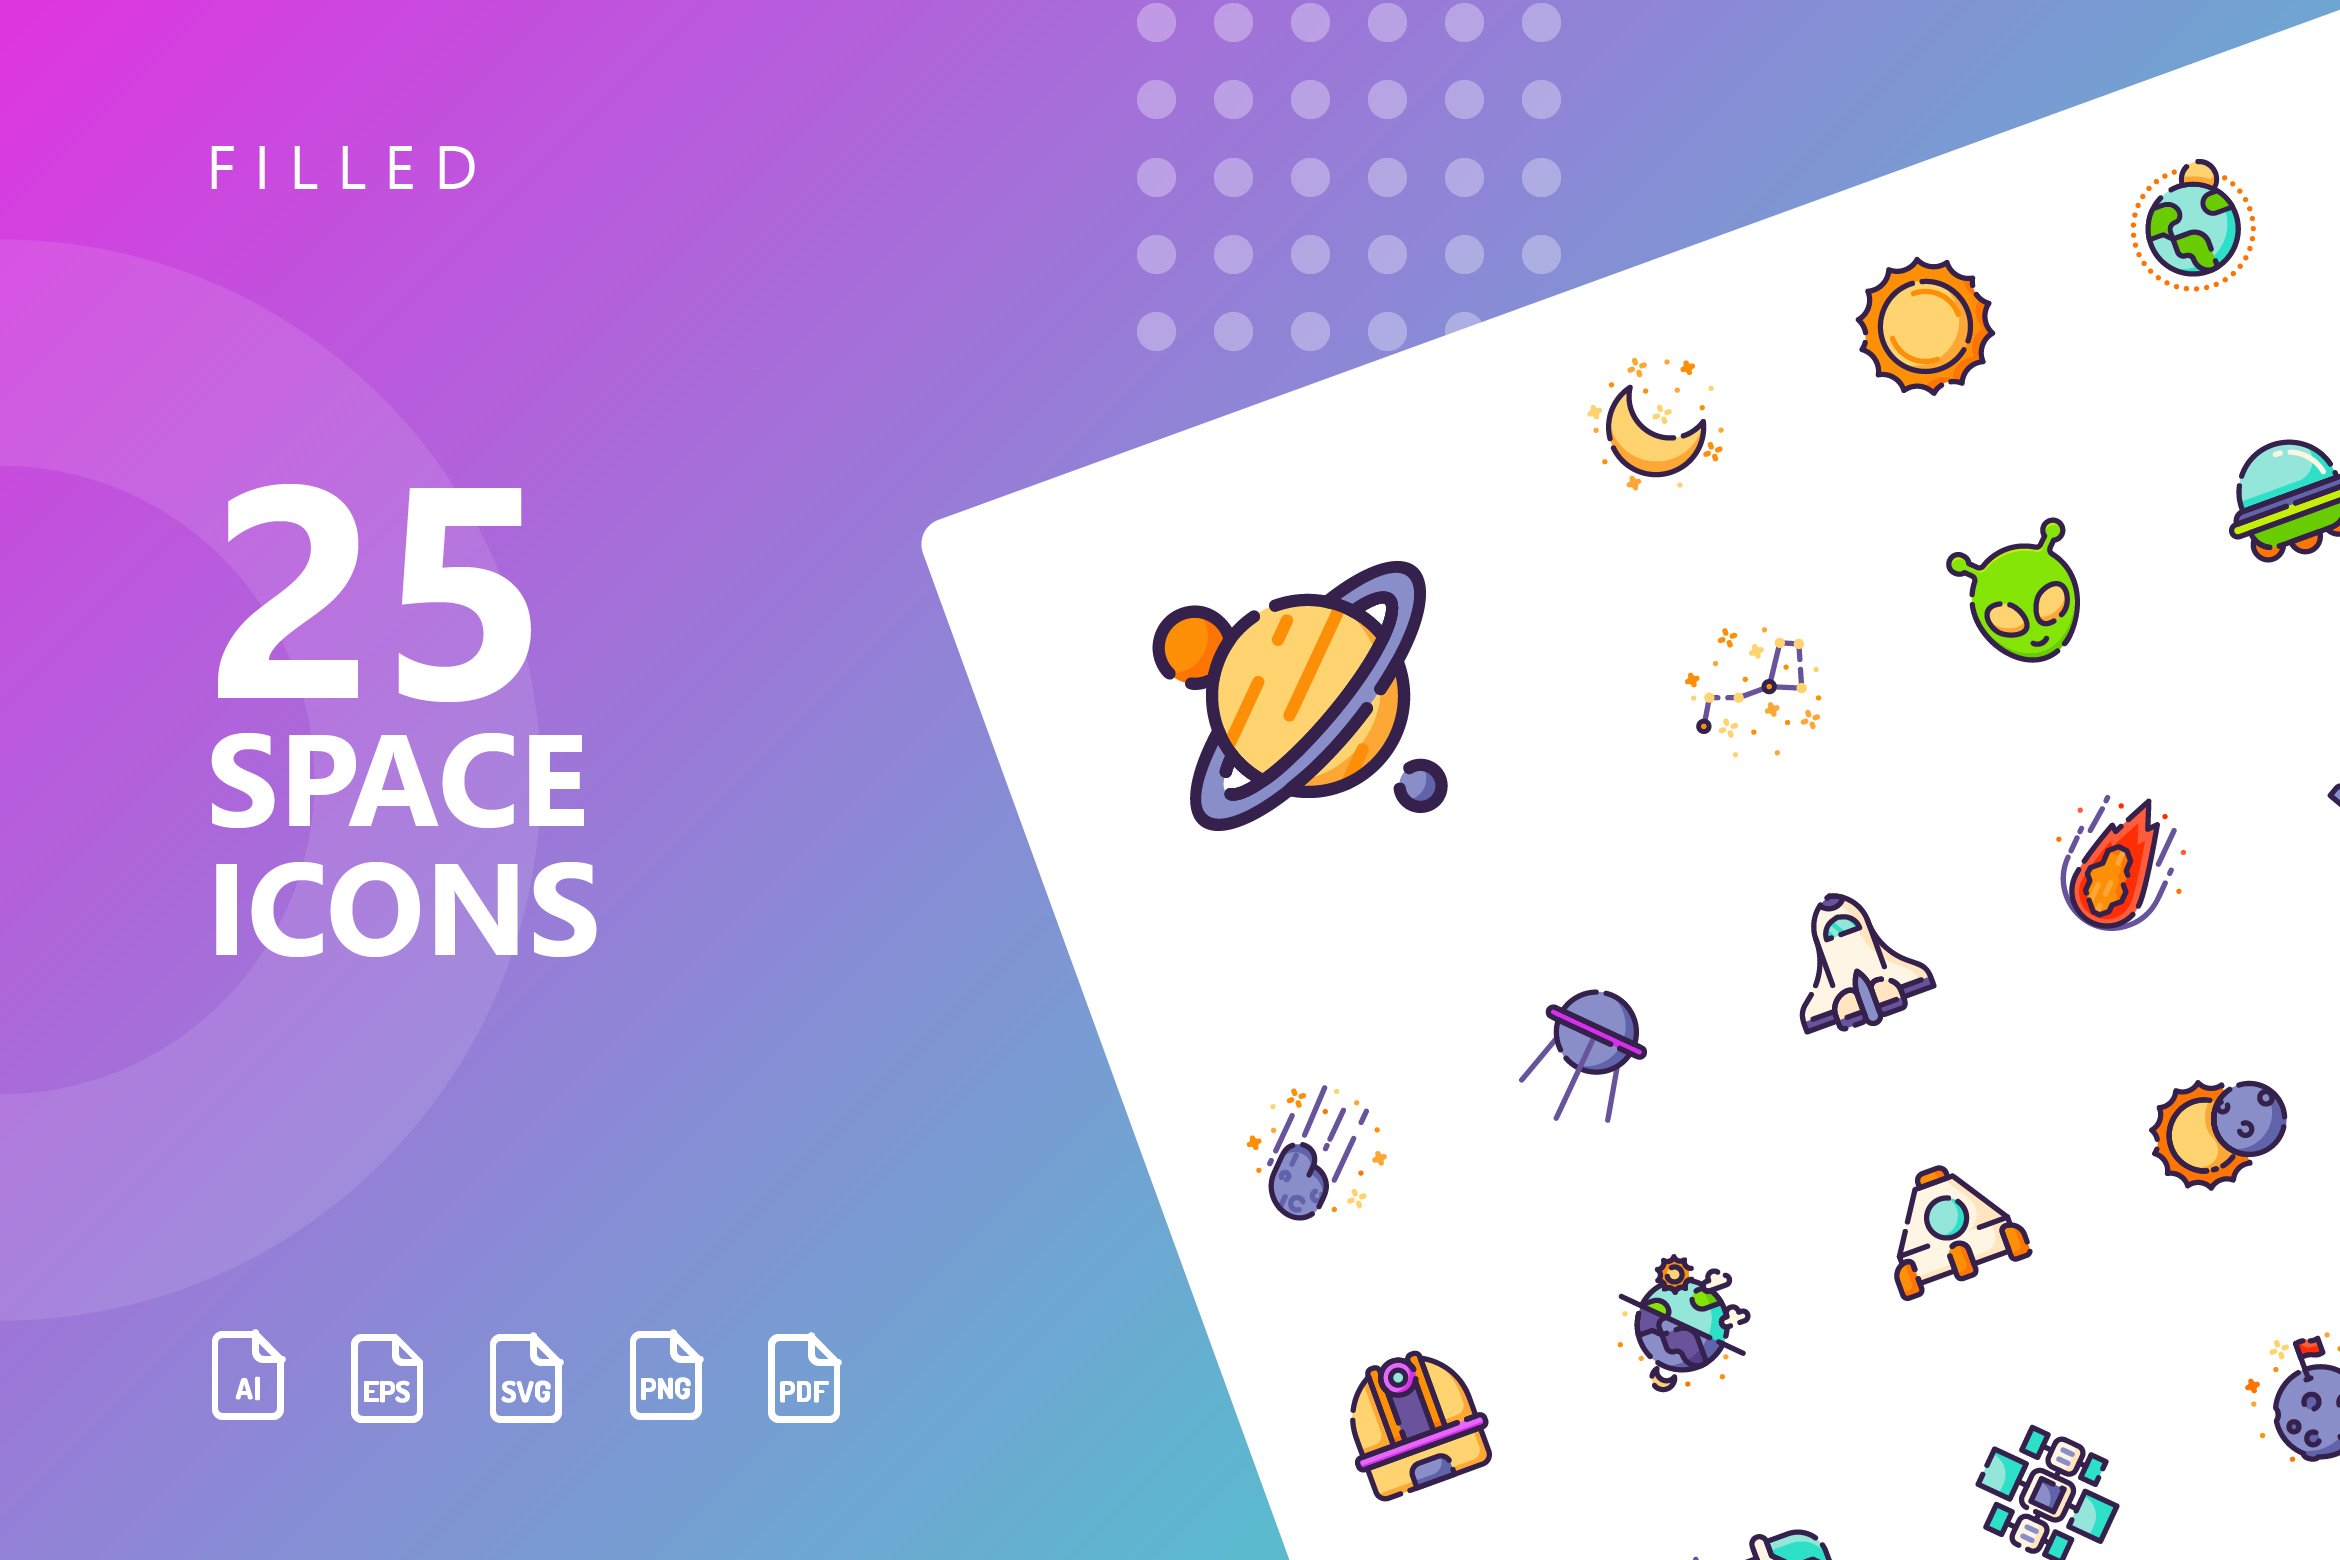 Space Filled Icons cover image.